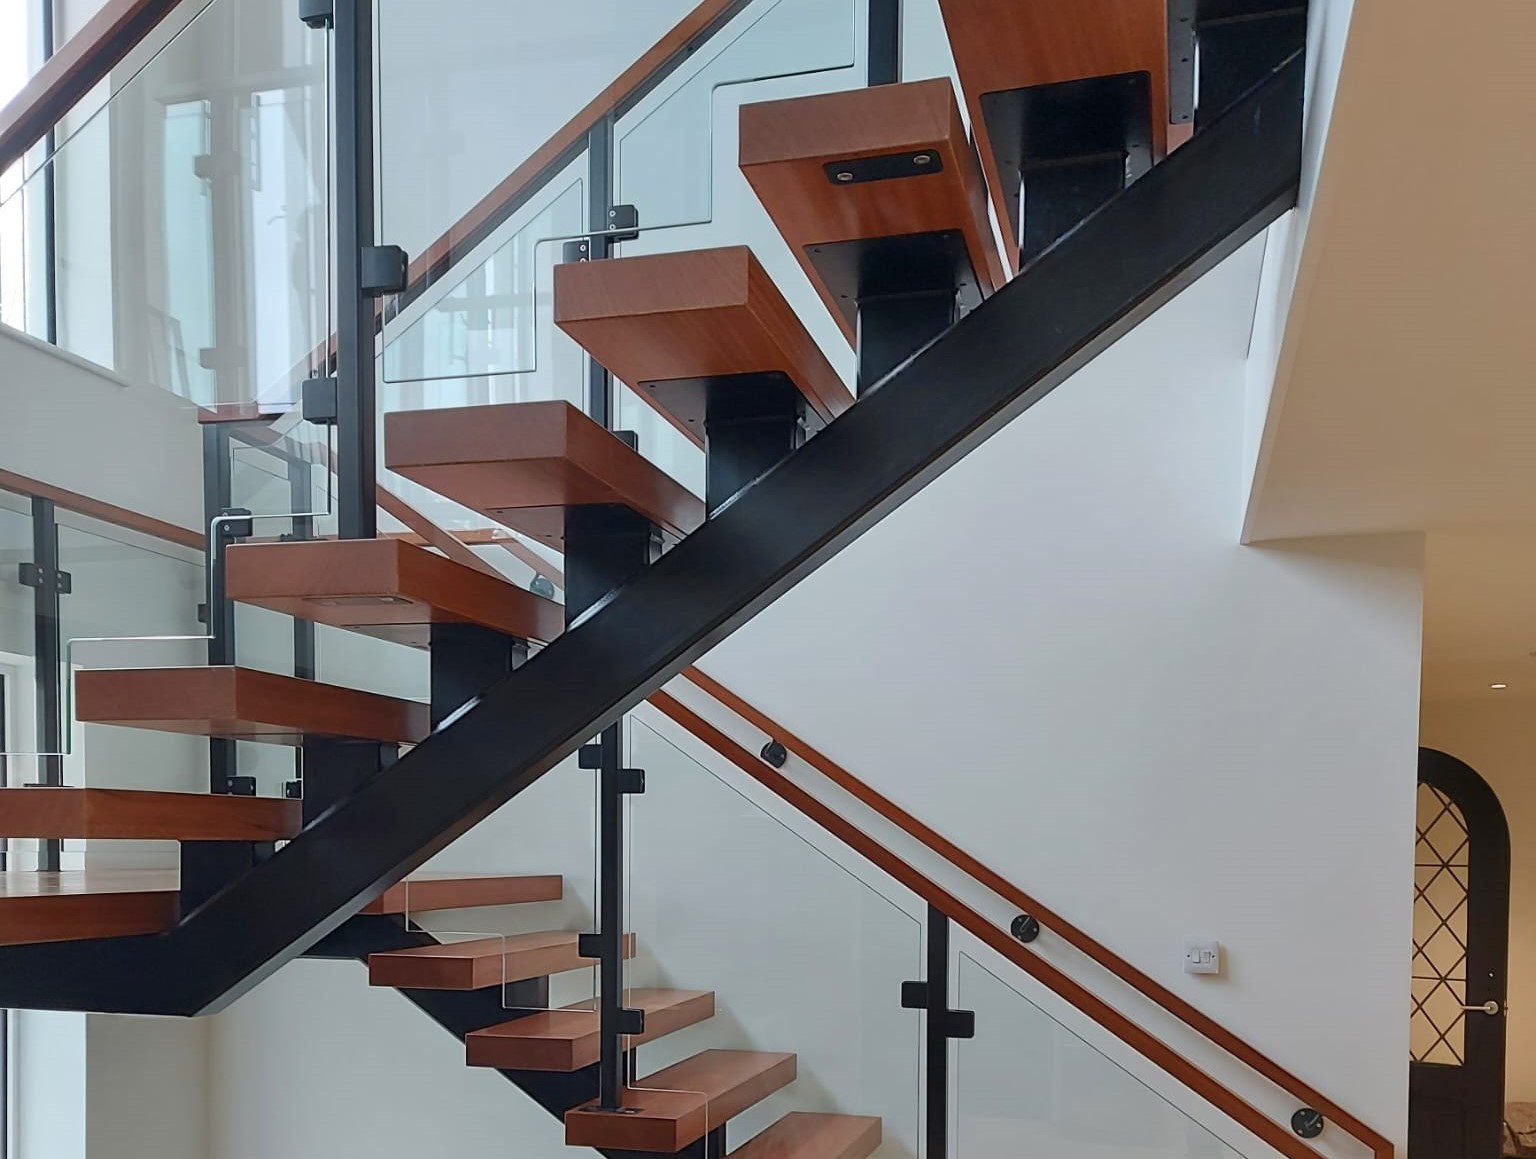 Spine Beam Feature Stair with Timber Treads & Glass Balustrade